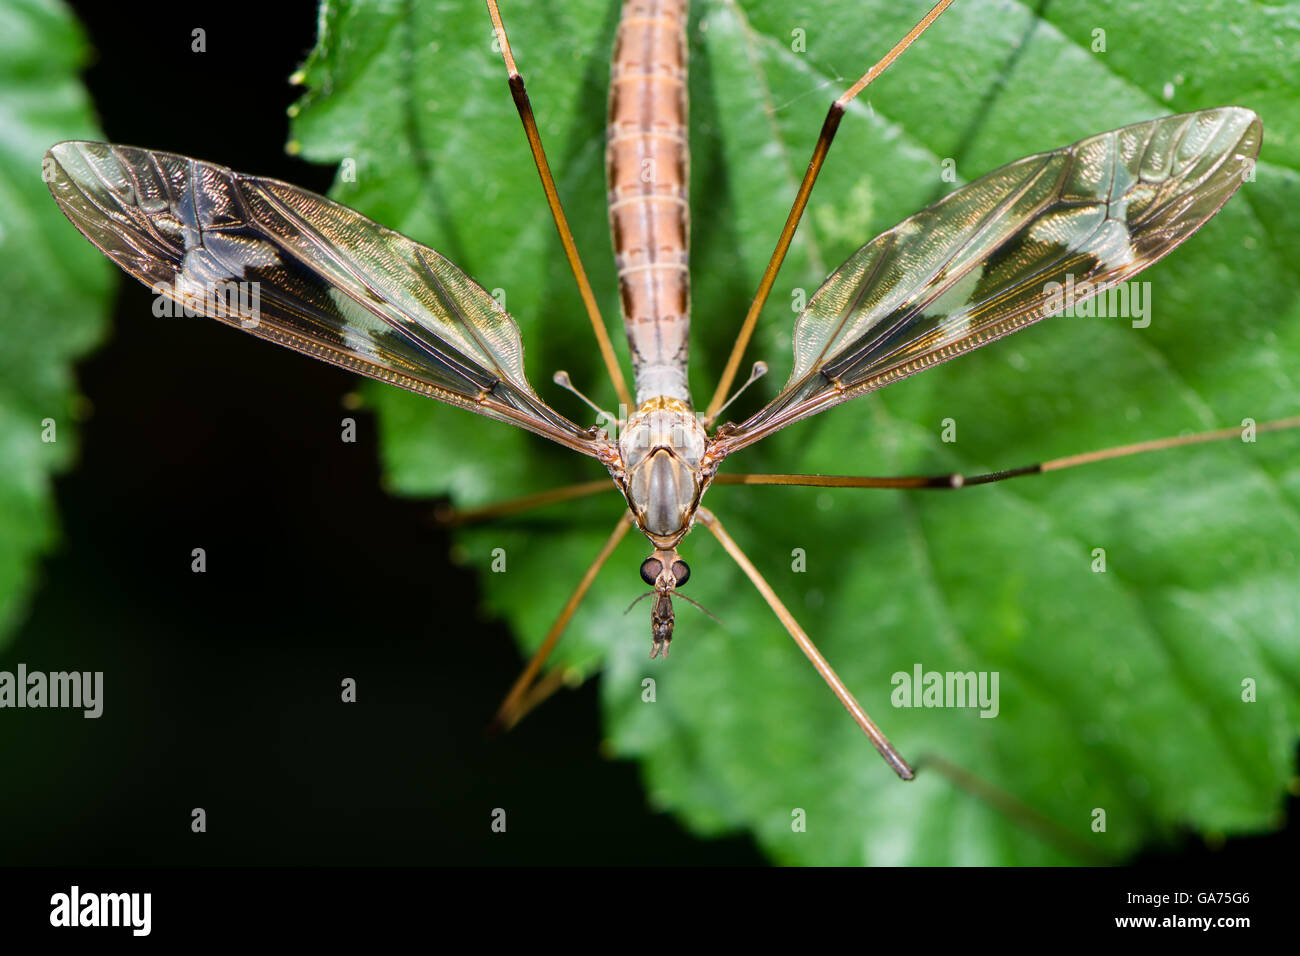 Tipula maxima cranefly. Largest British crane-fly in the family Tipulidae, showing heavily patterned wings Stock Photo